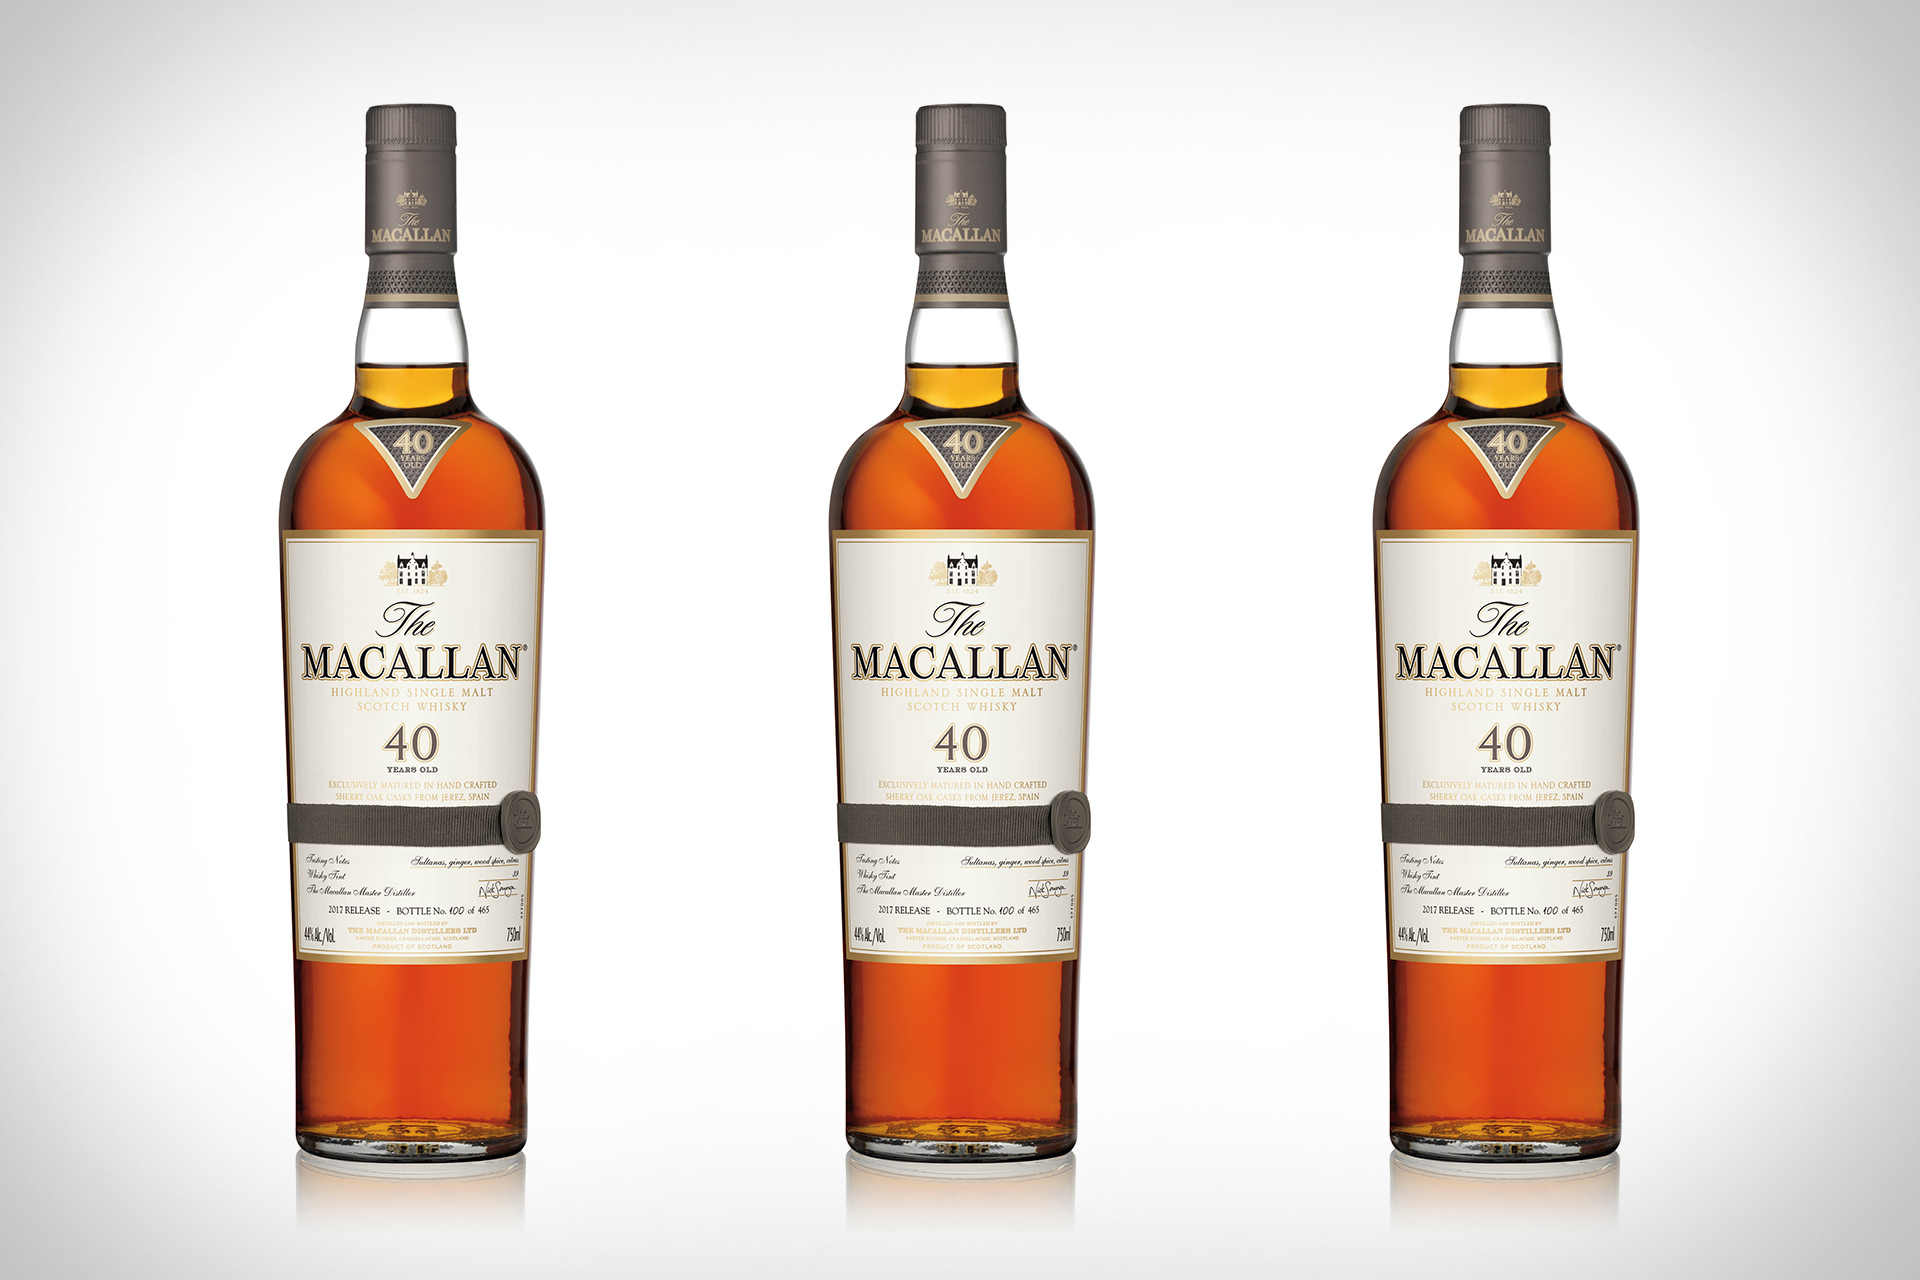 The Macallan 40 Year Old Scotch Whisky Uncrate